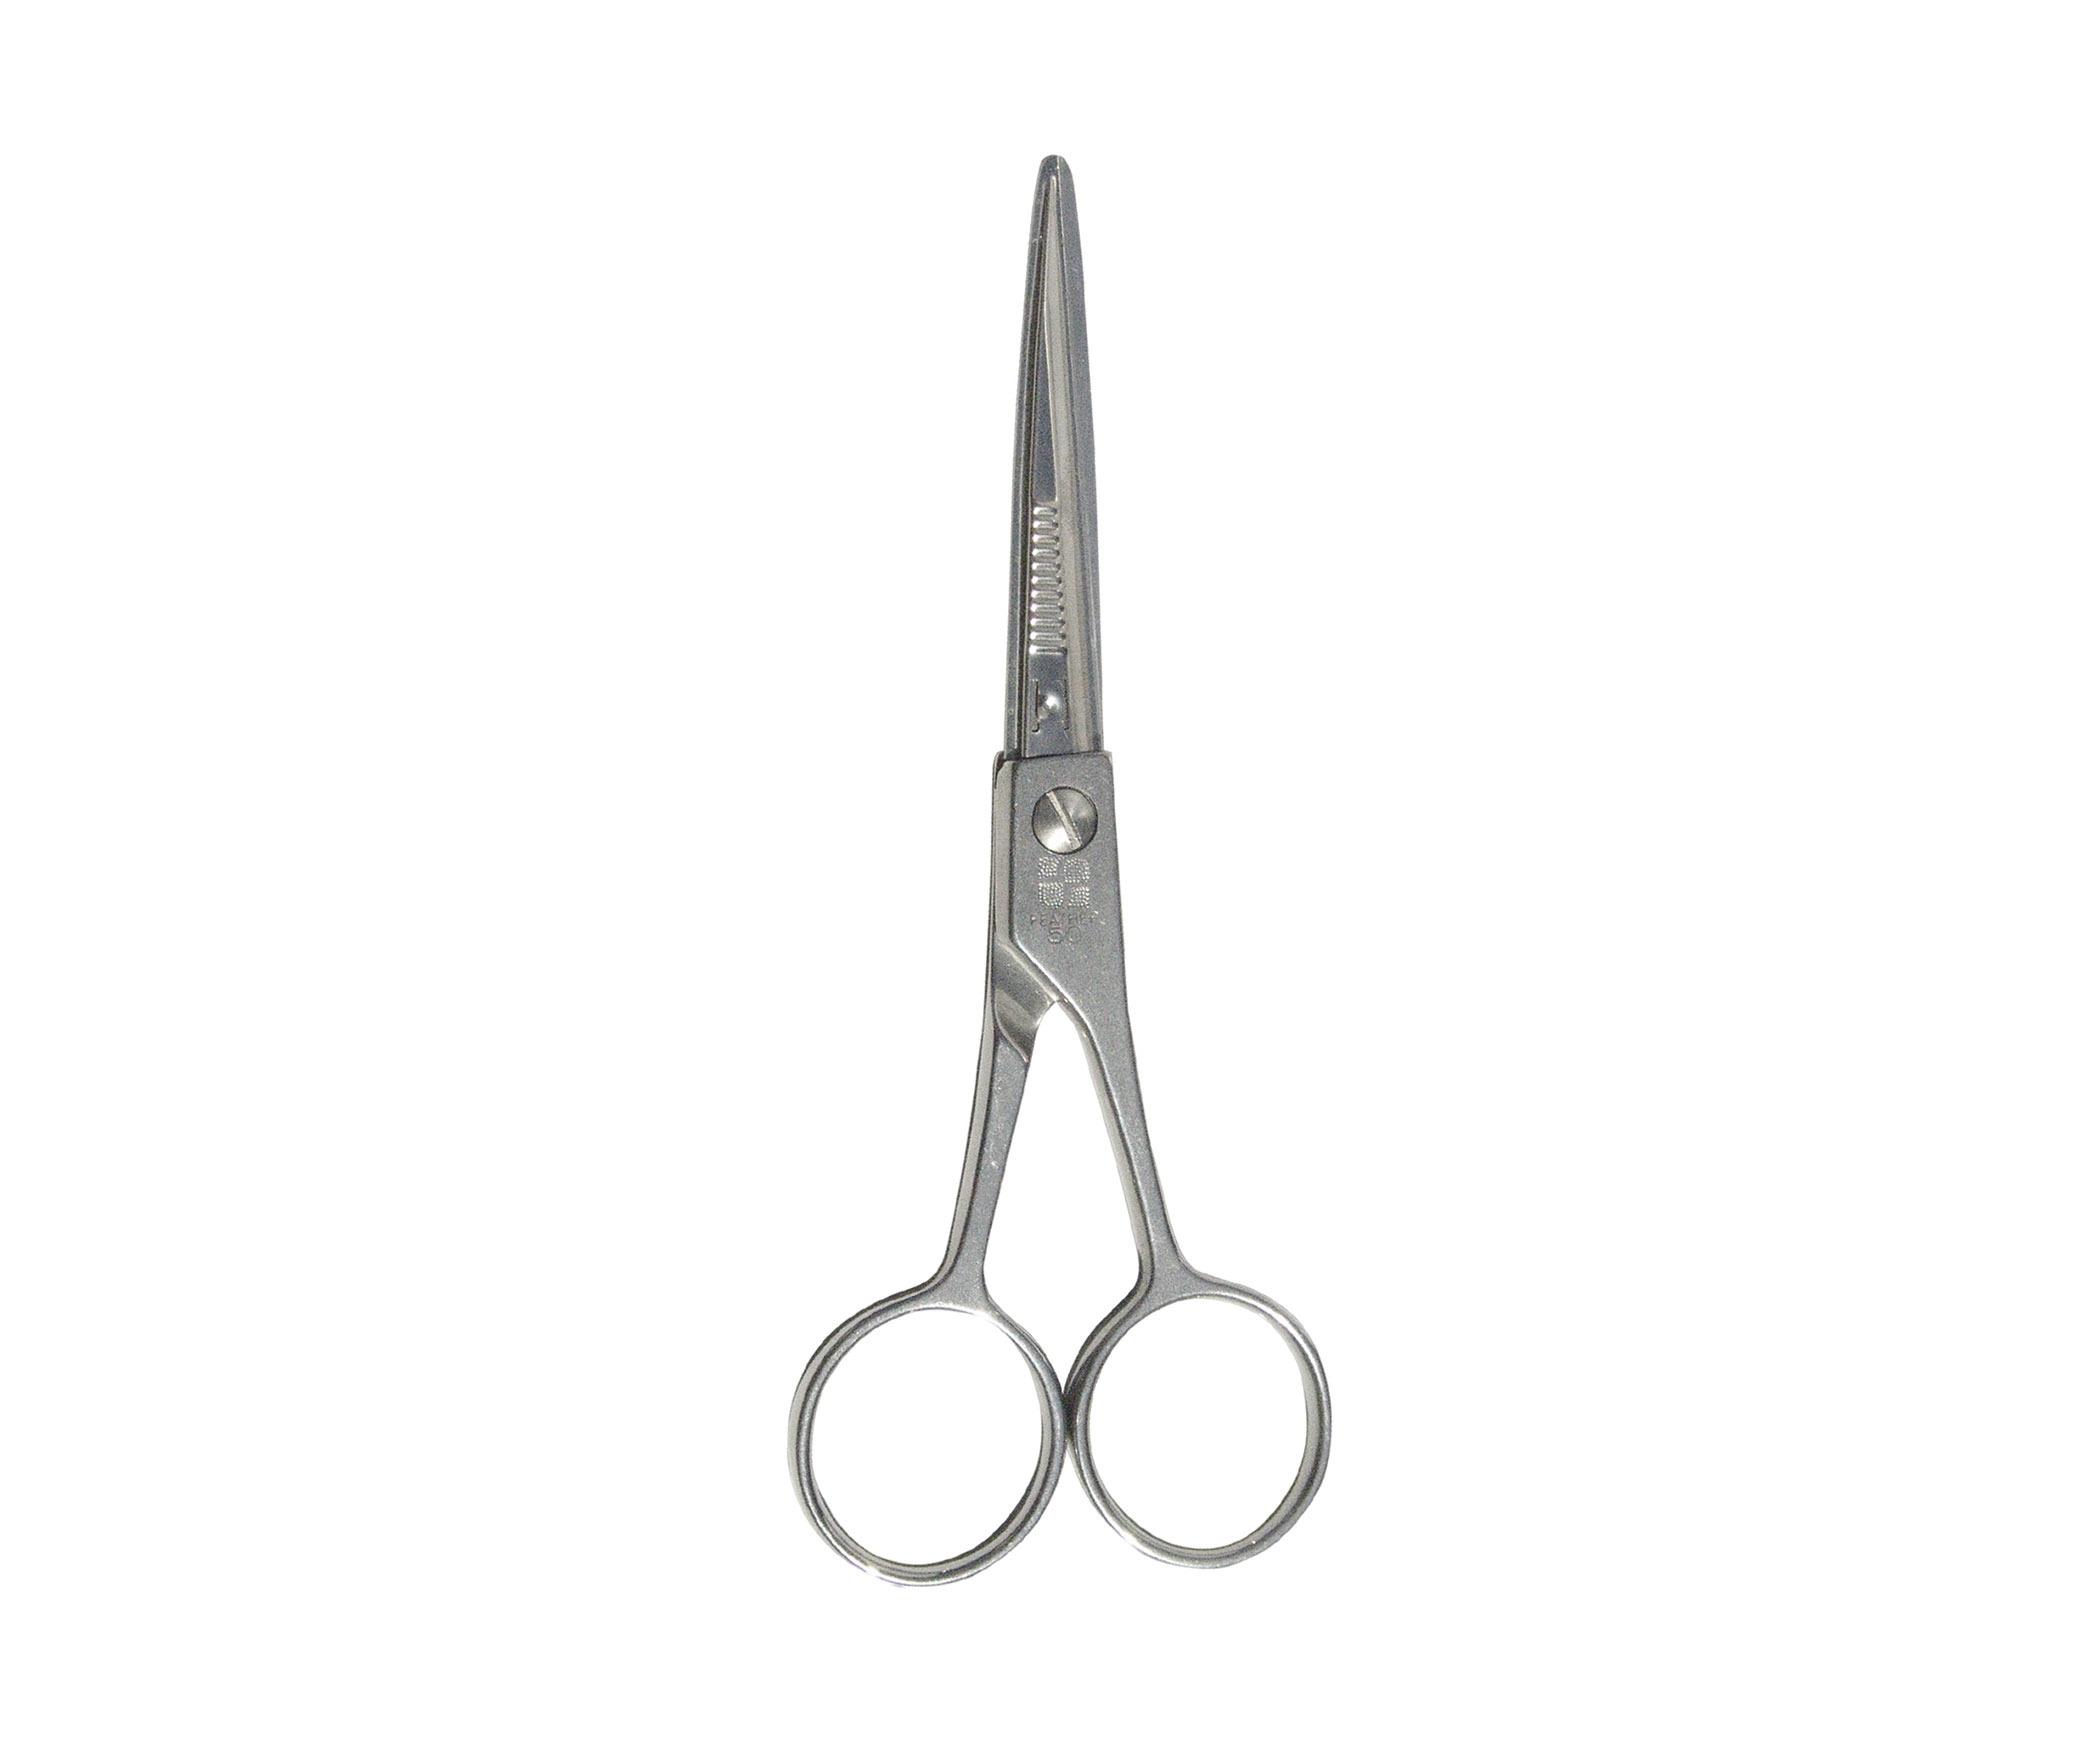 Feather Switch Blade Shears 5.0